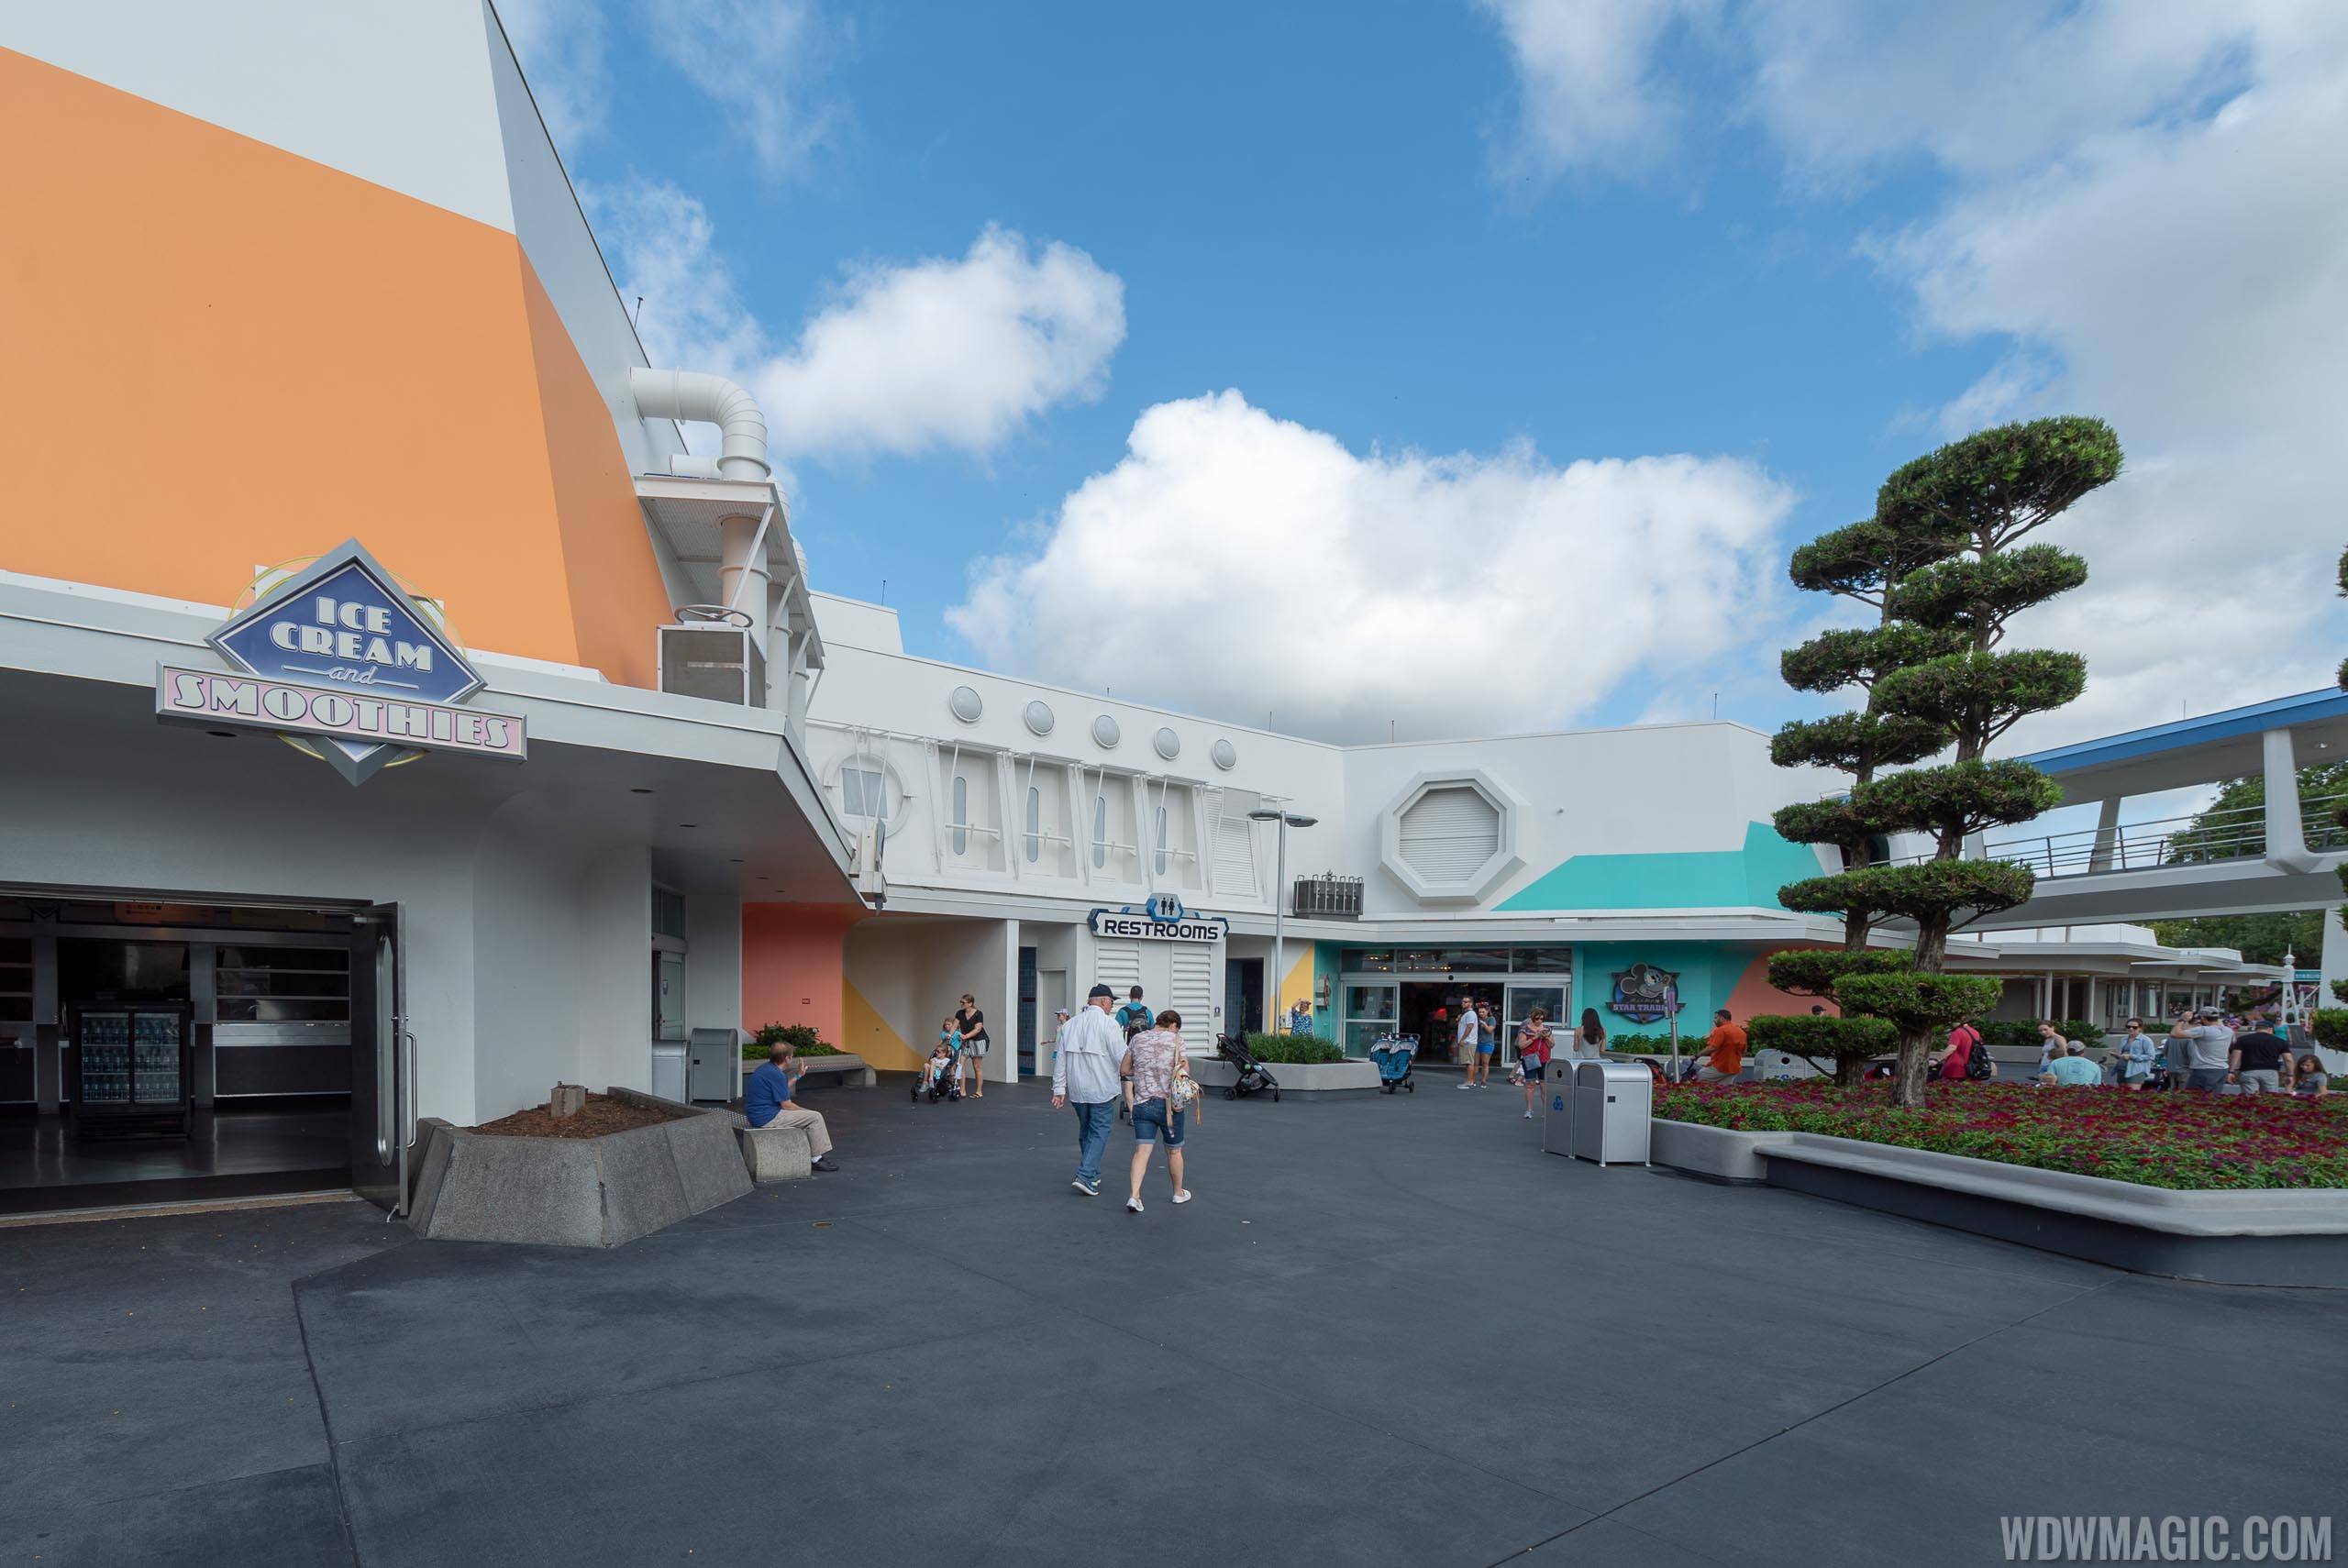 Tomorrowland paint changes around Mickey's Star Traders - May 2019